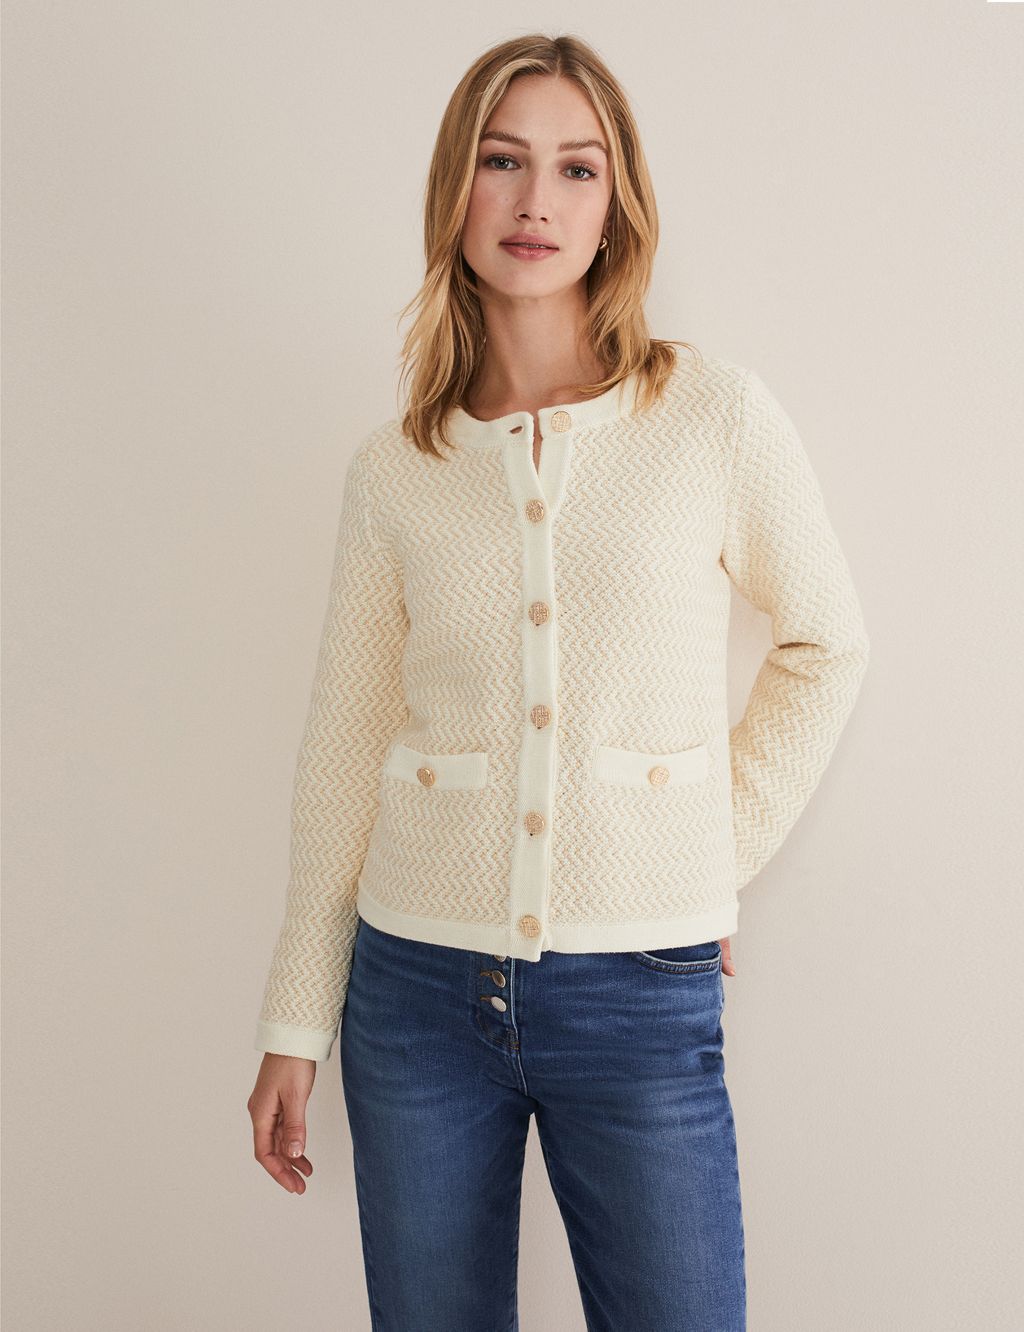 Pure Cotton Textured Cropped Jacket image 1